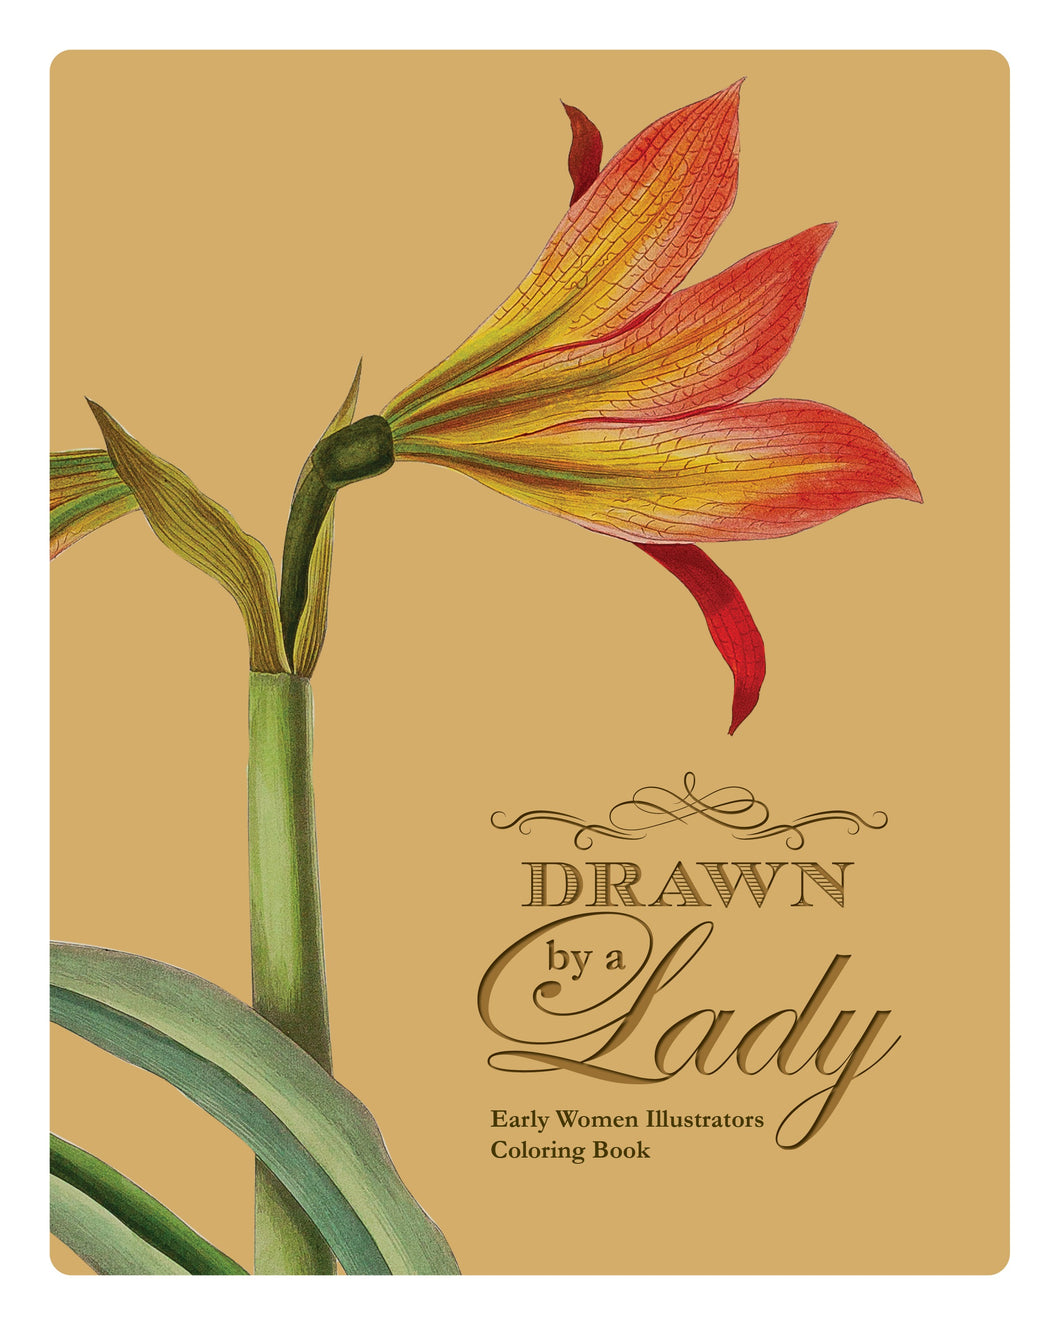 Drawn by a Lady: Early Women Illustrators Coloring Book